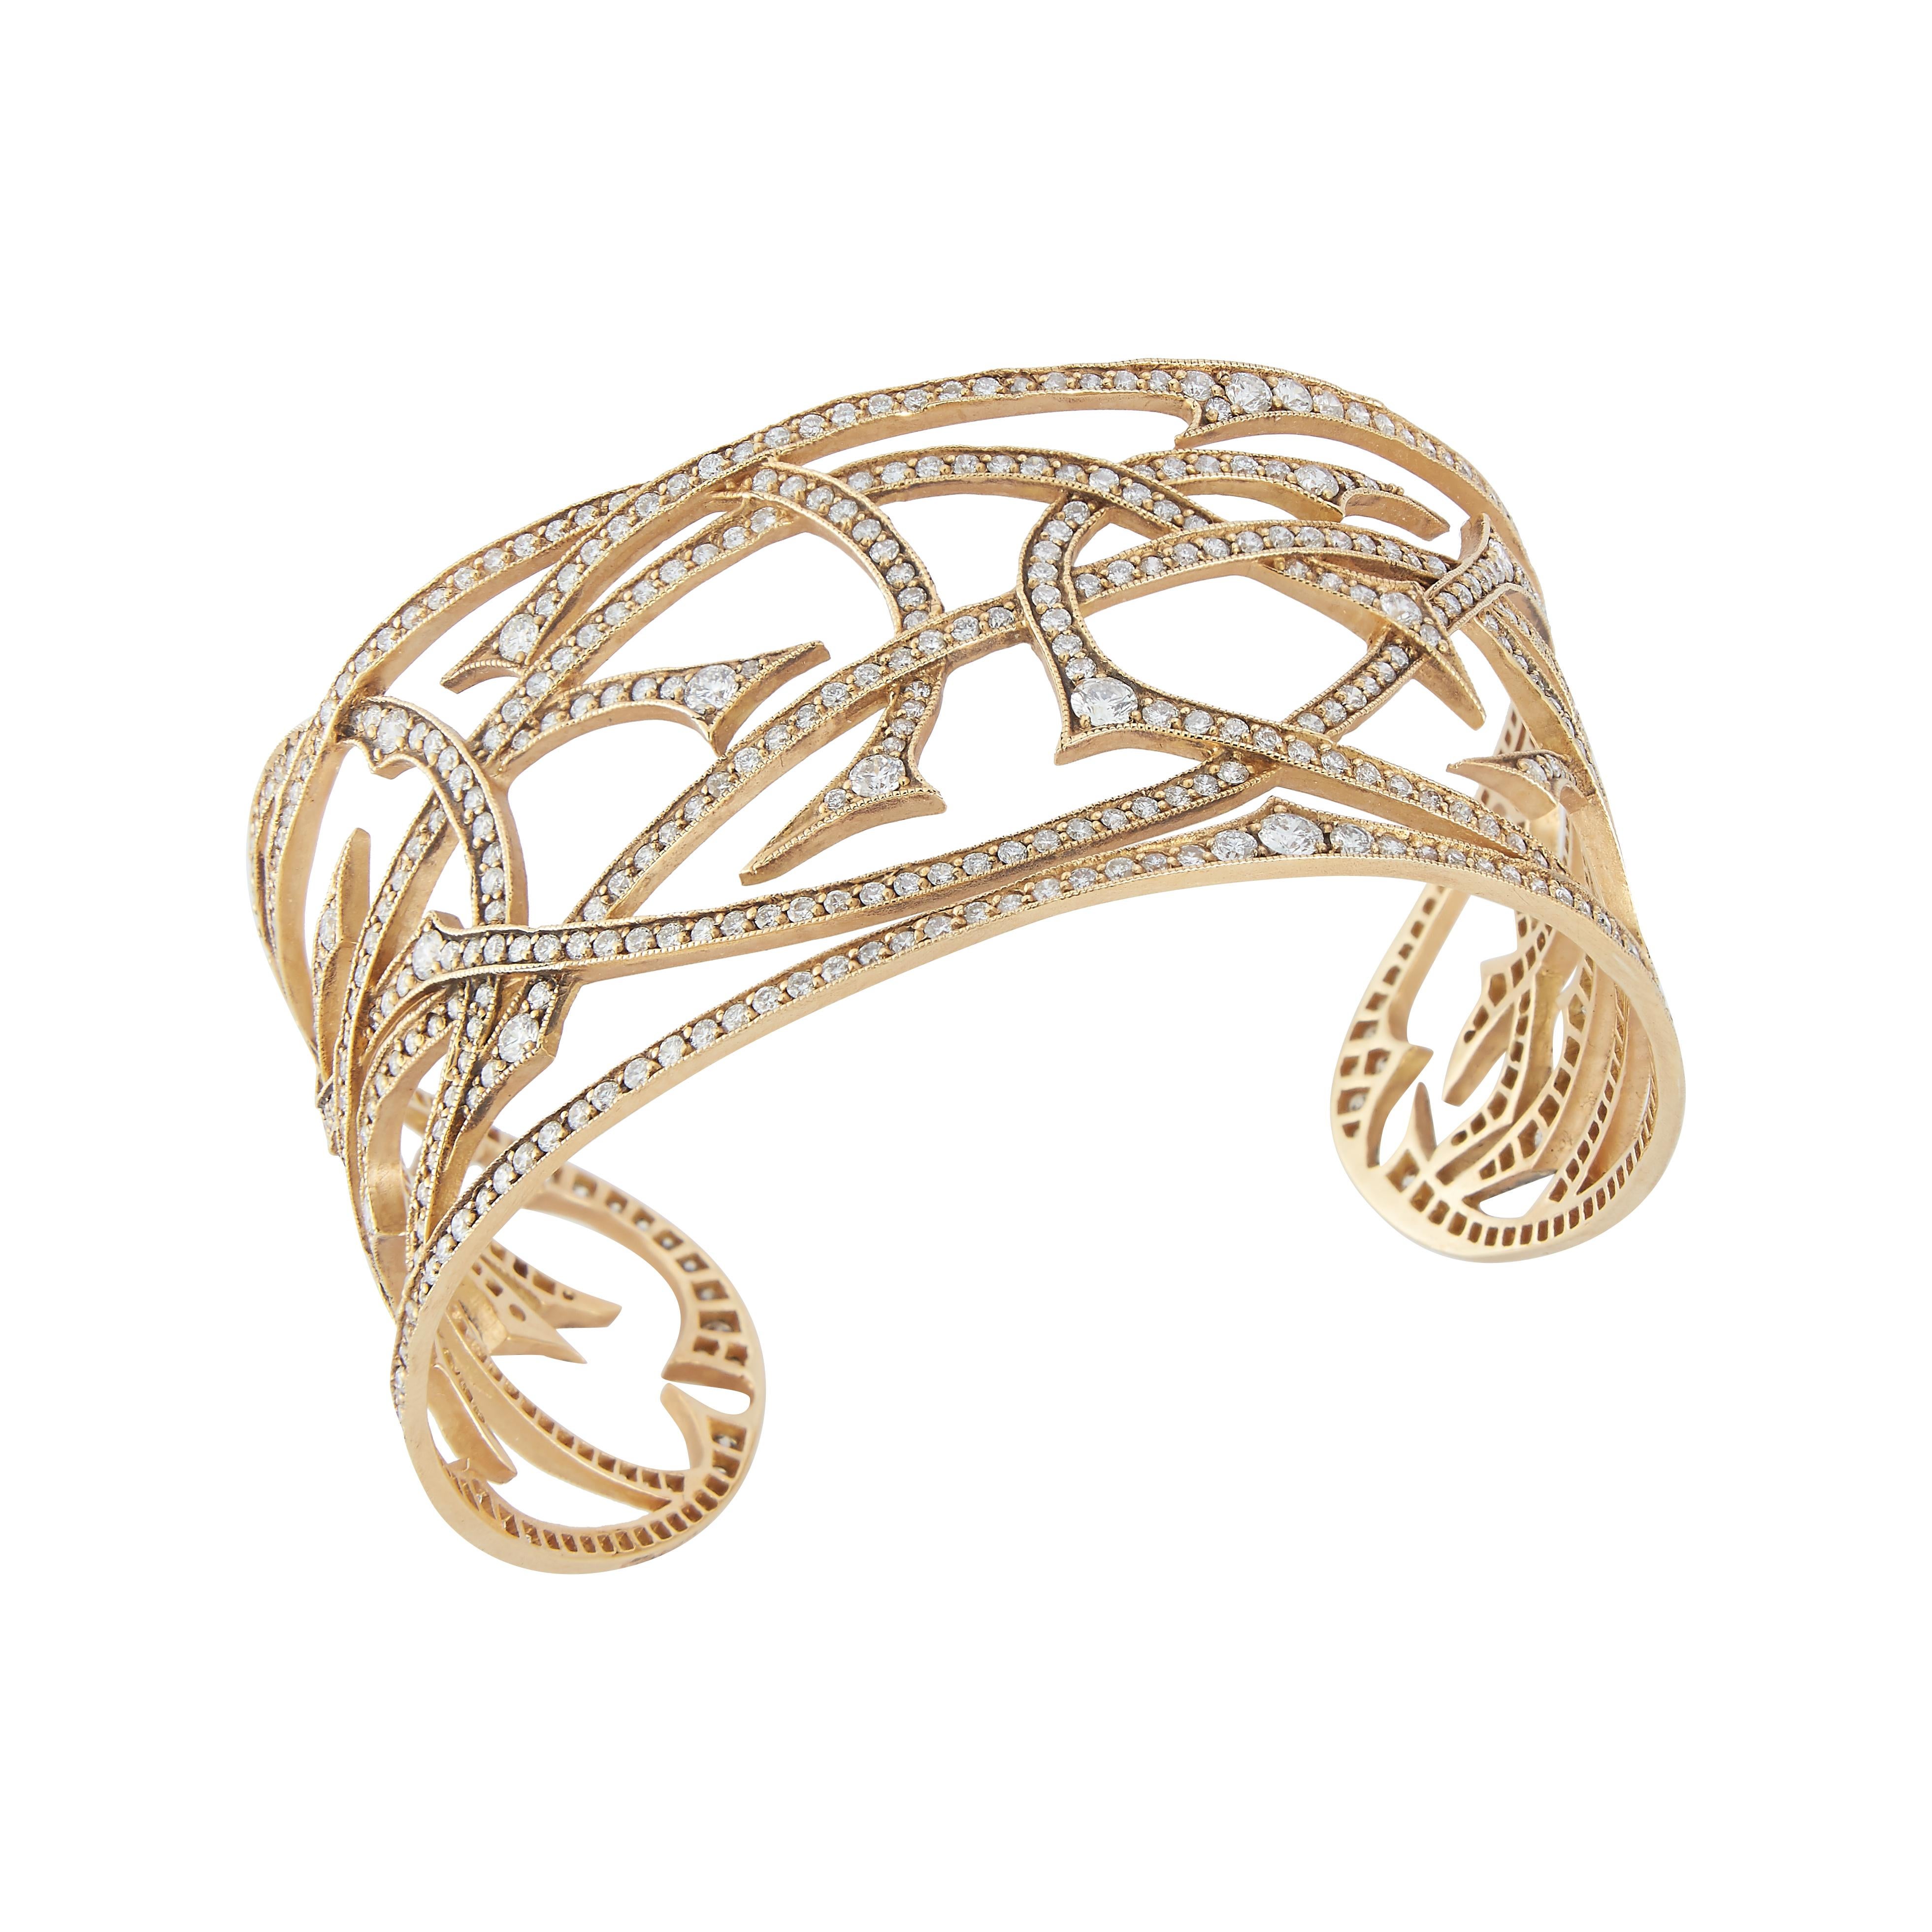 Parulina Couture Fine Jewelry-Small Vines Diamond Cuff from the Briar Rose Collection.
This diamond cuff from Parulina features stunning 18k yellow gold with an impressive 6.22ct of round brilliant cut diamonds.
2.5 inch inside diameter.

Metal: 18K